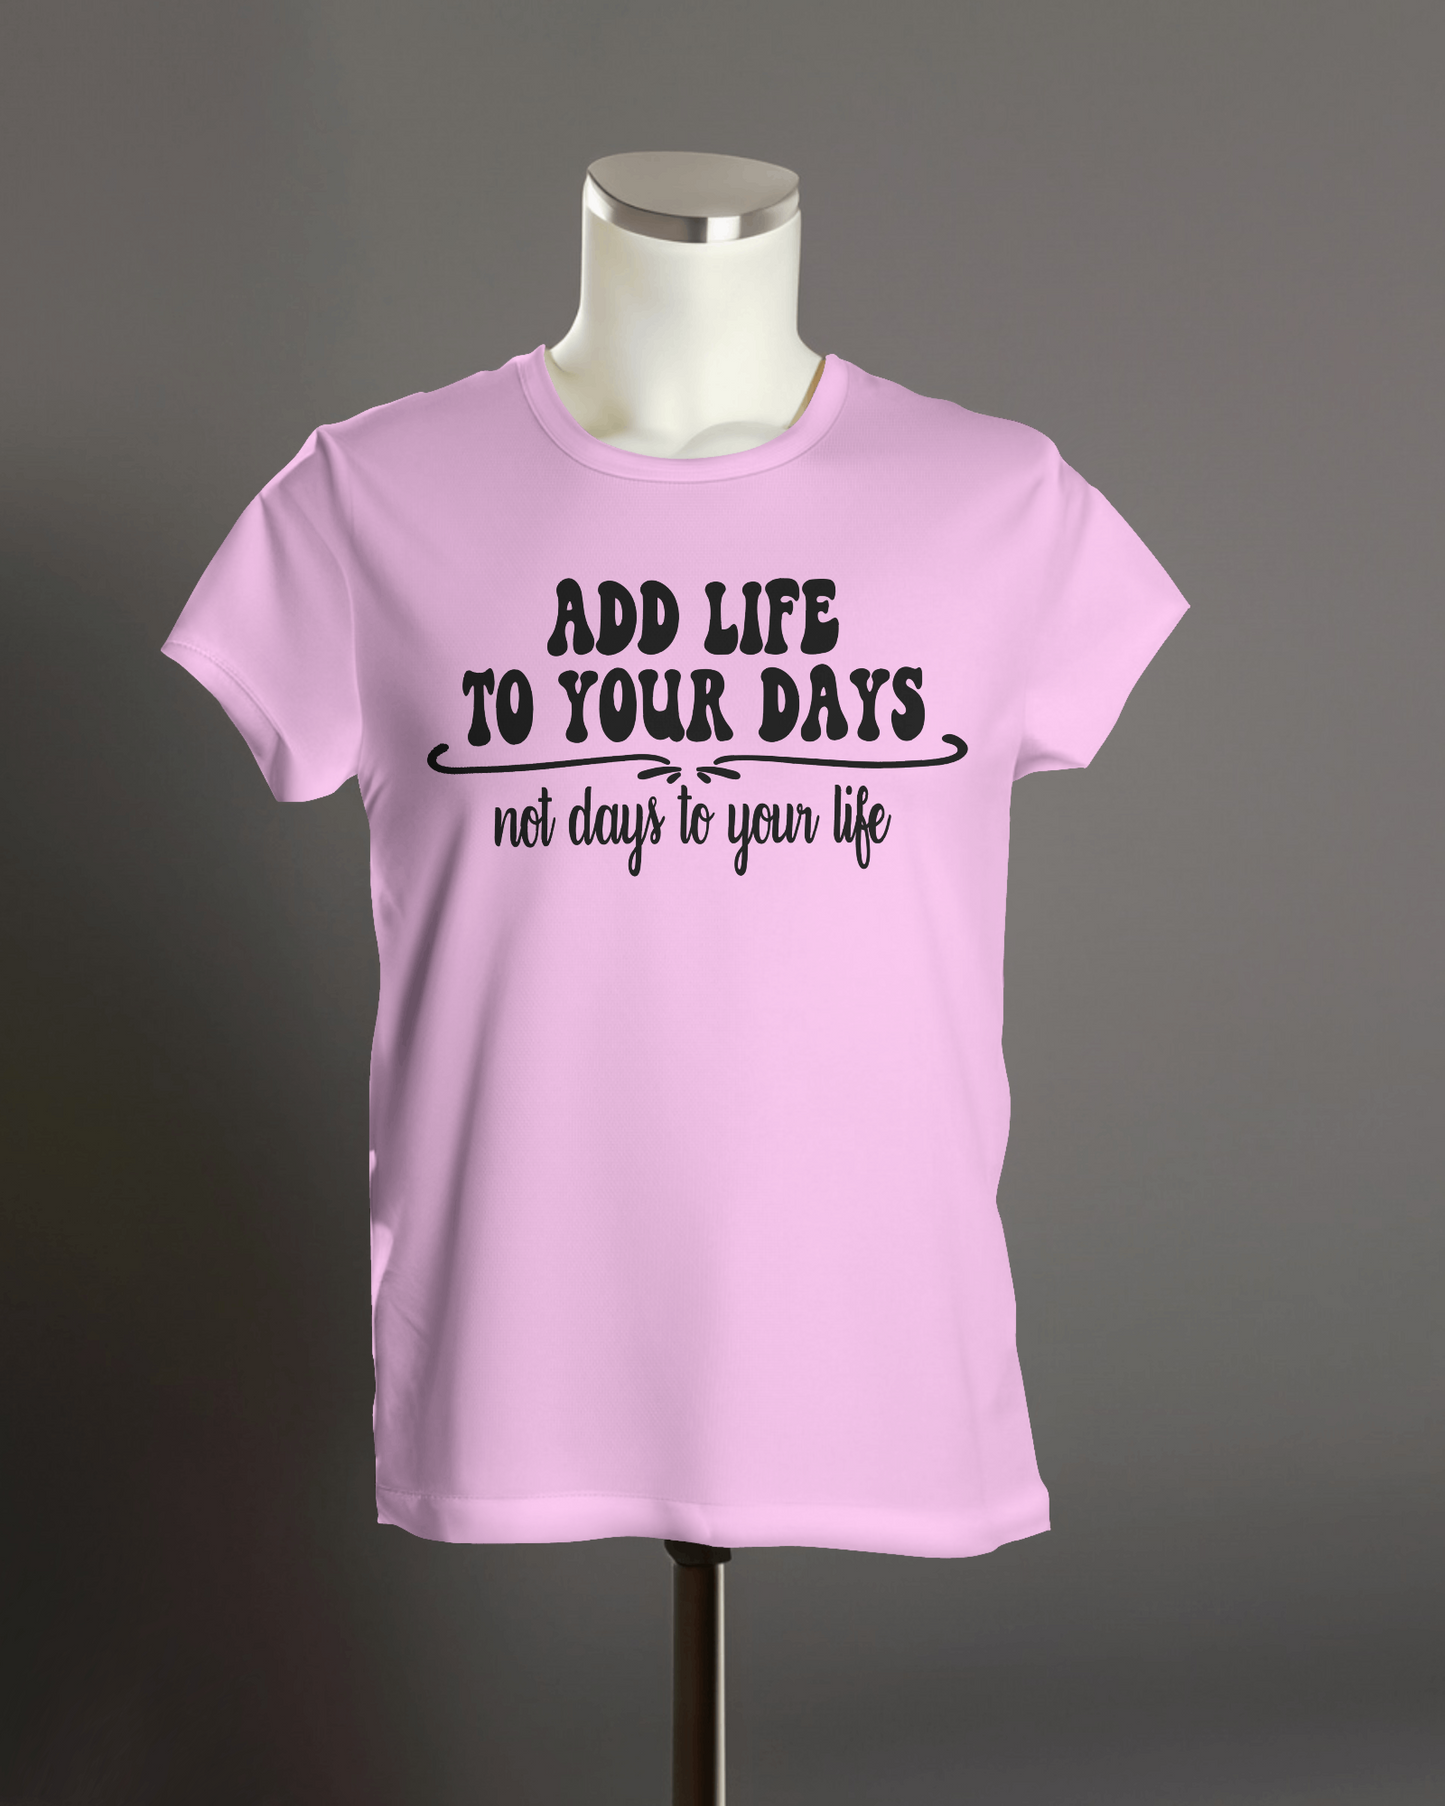 "Add Life to Your Days, Not Days to Your life" T-Shirt.